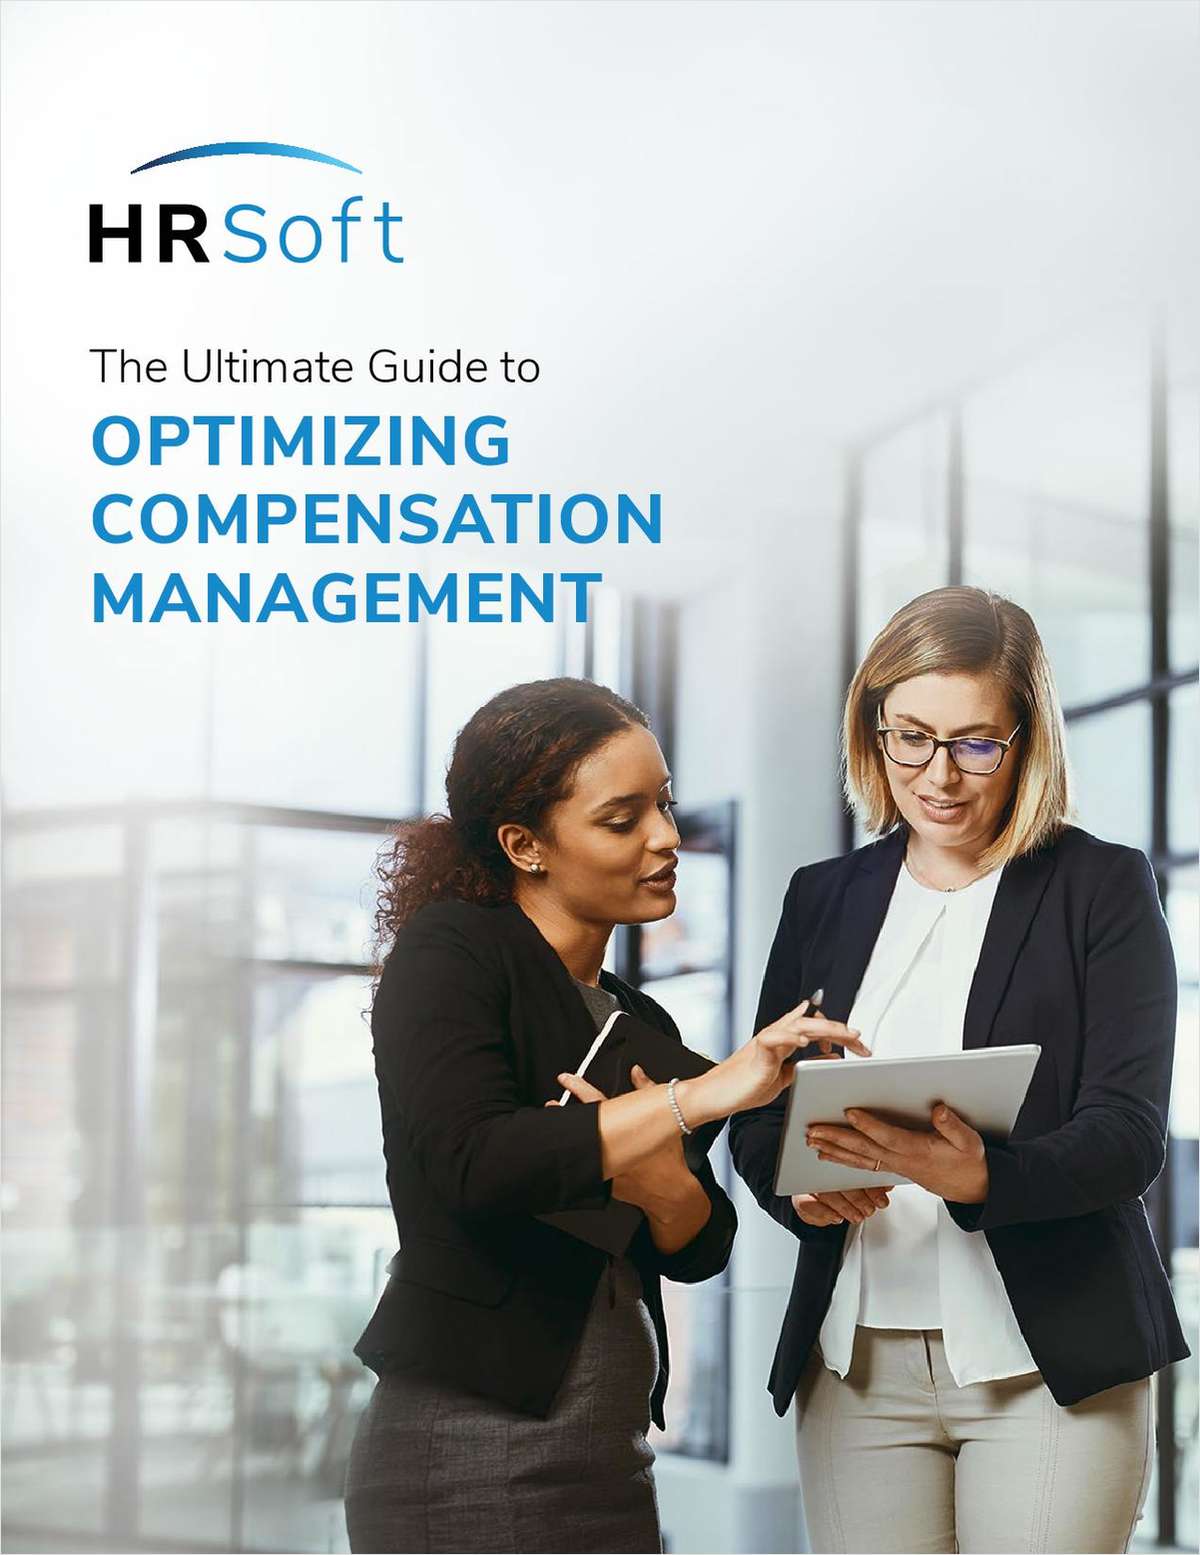 The Ultimate Guide to Optimizing Compensation Management